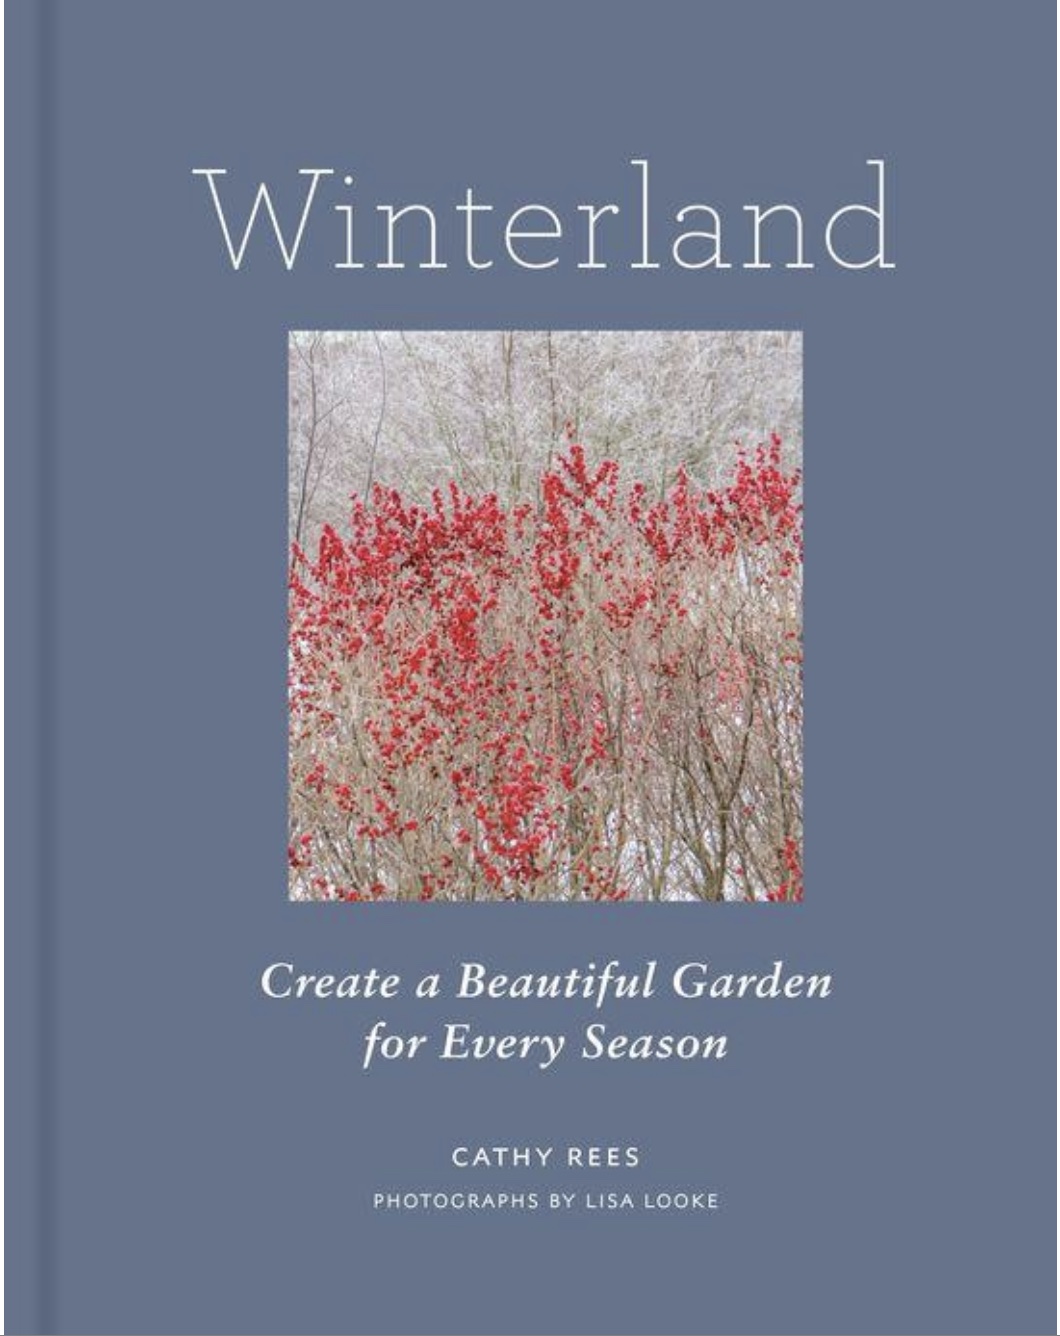 Blue and red book cover for Winterland